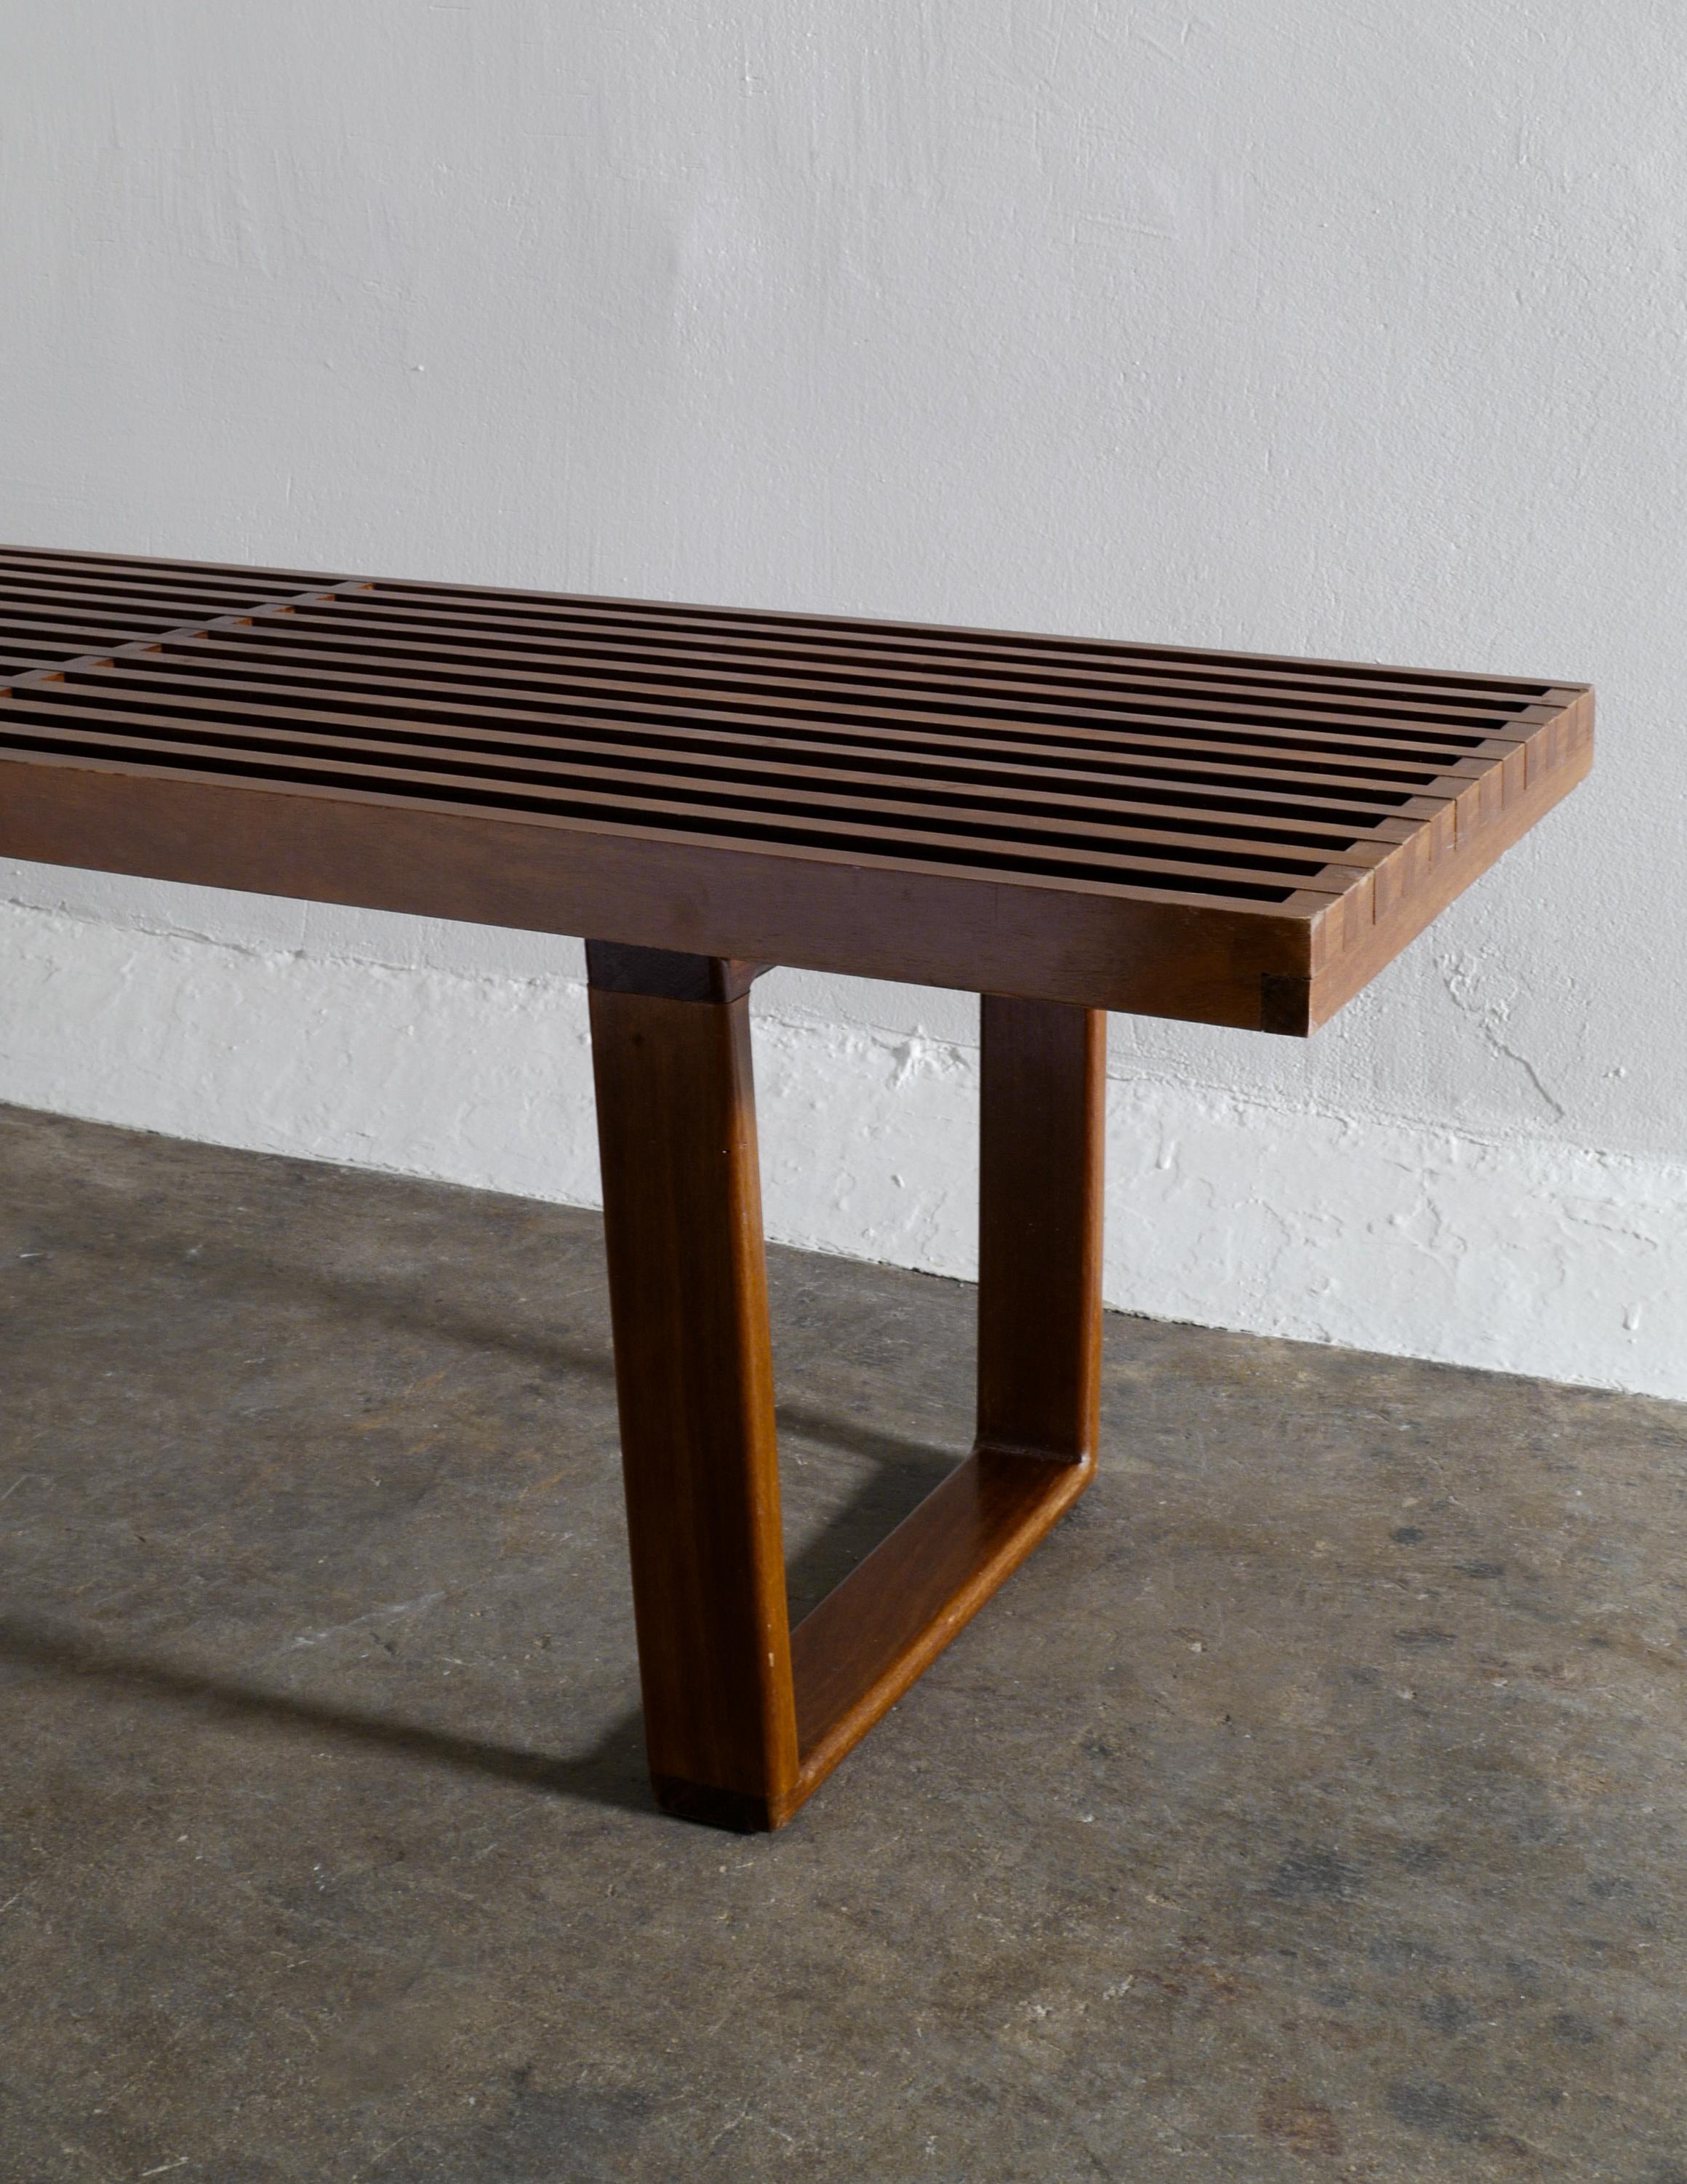 Stained Wooden Bench in Walnut in style of George Nelson Produced in France, 1960s